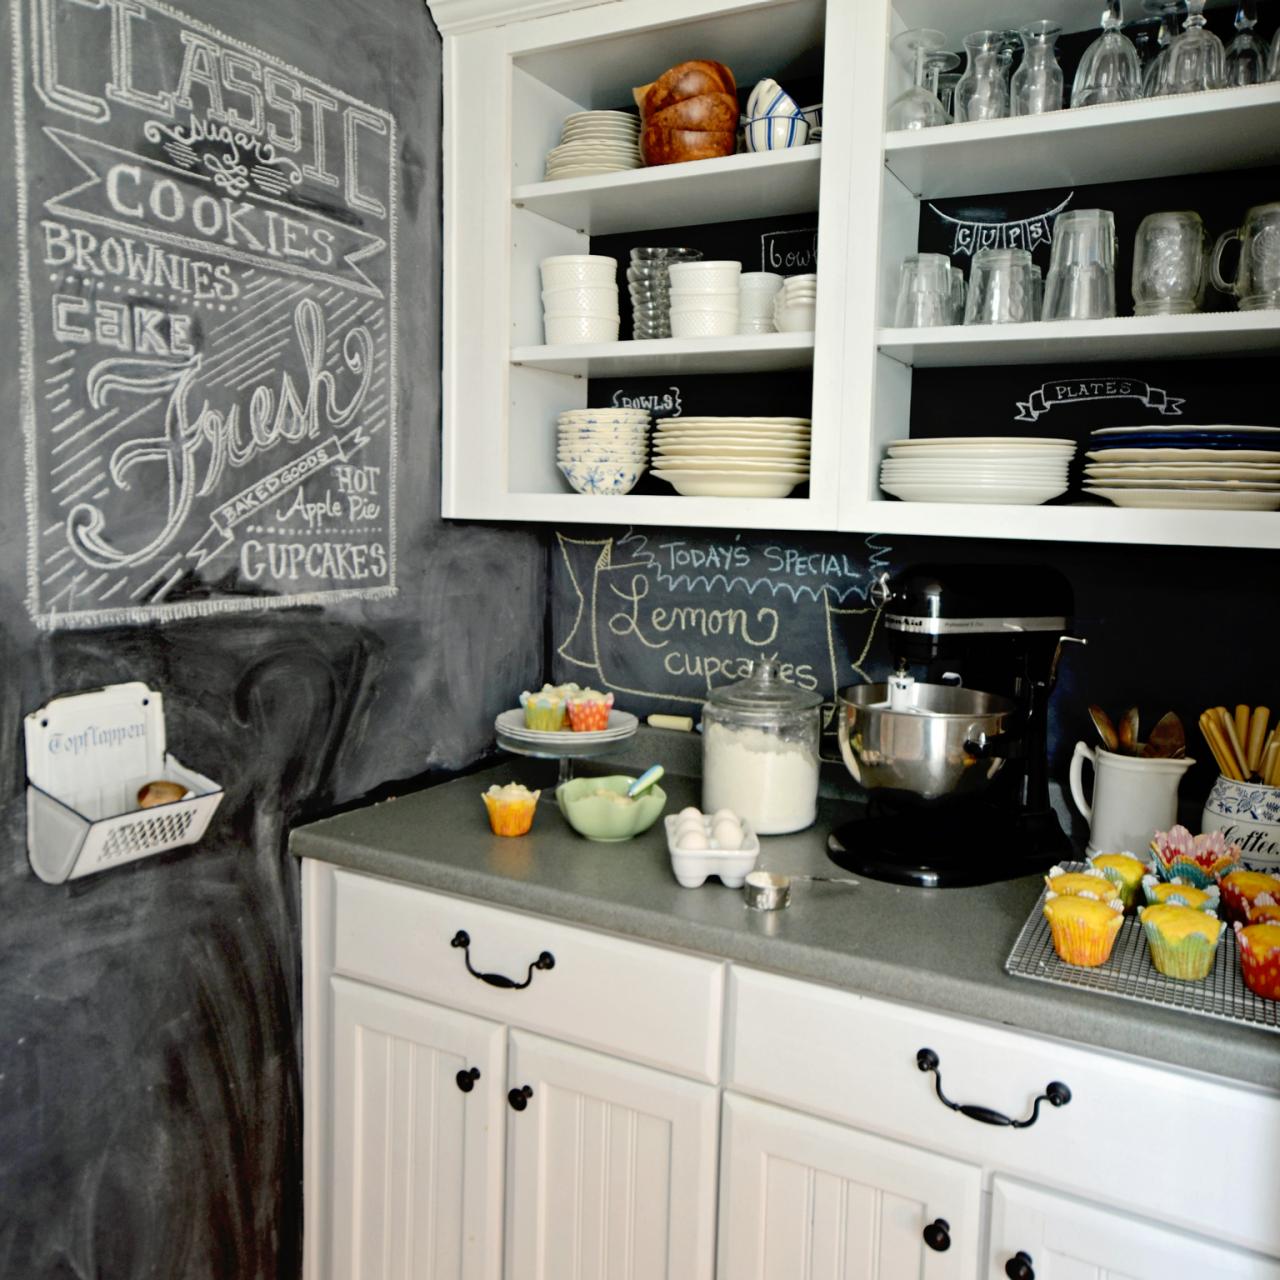 Uses for Chalkboard Paint DIY Projects Craft Ideas & How To's for Home  Decor with Videos